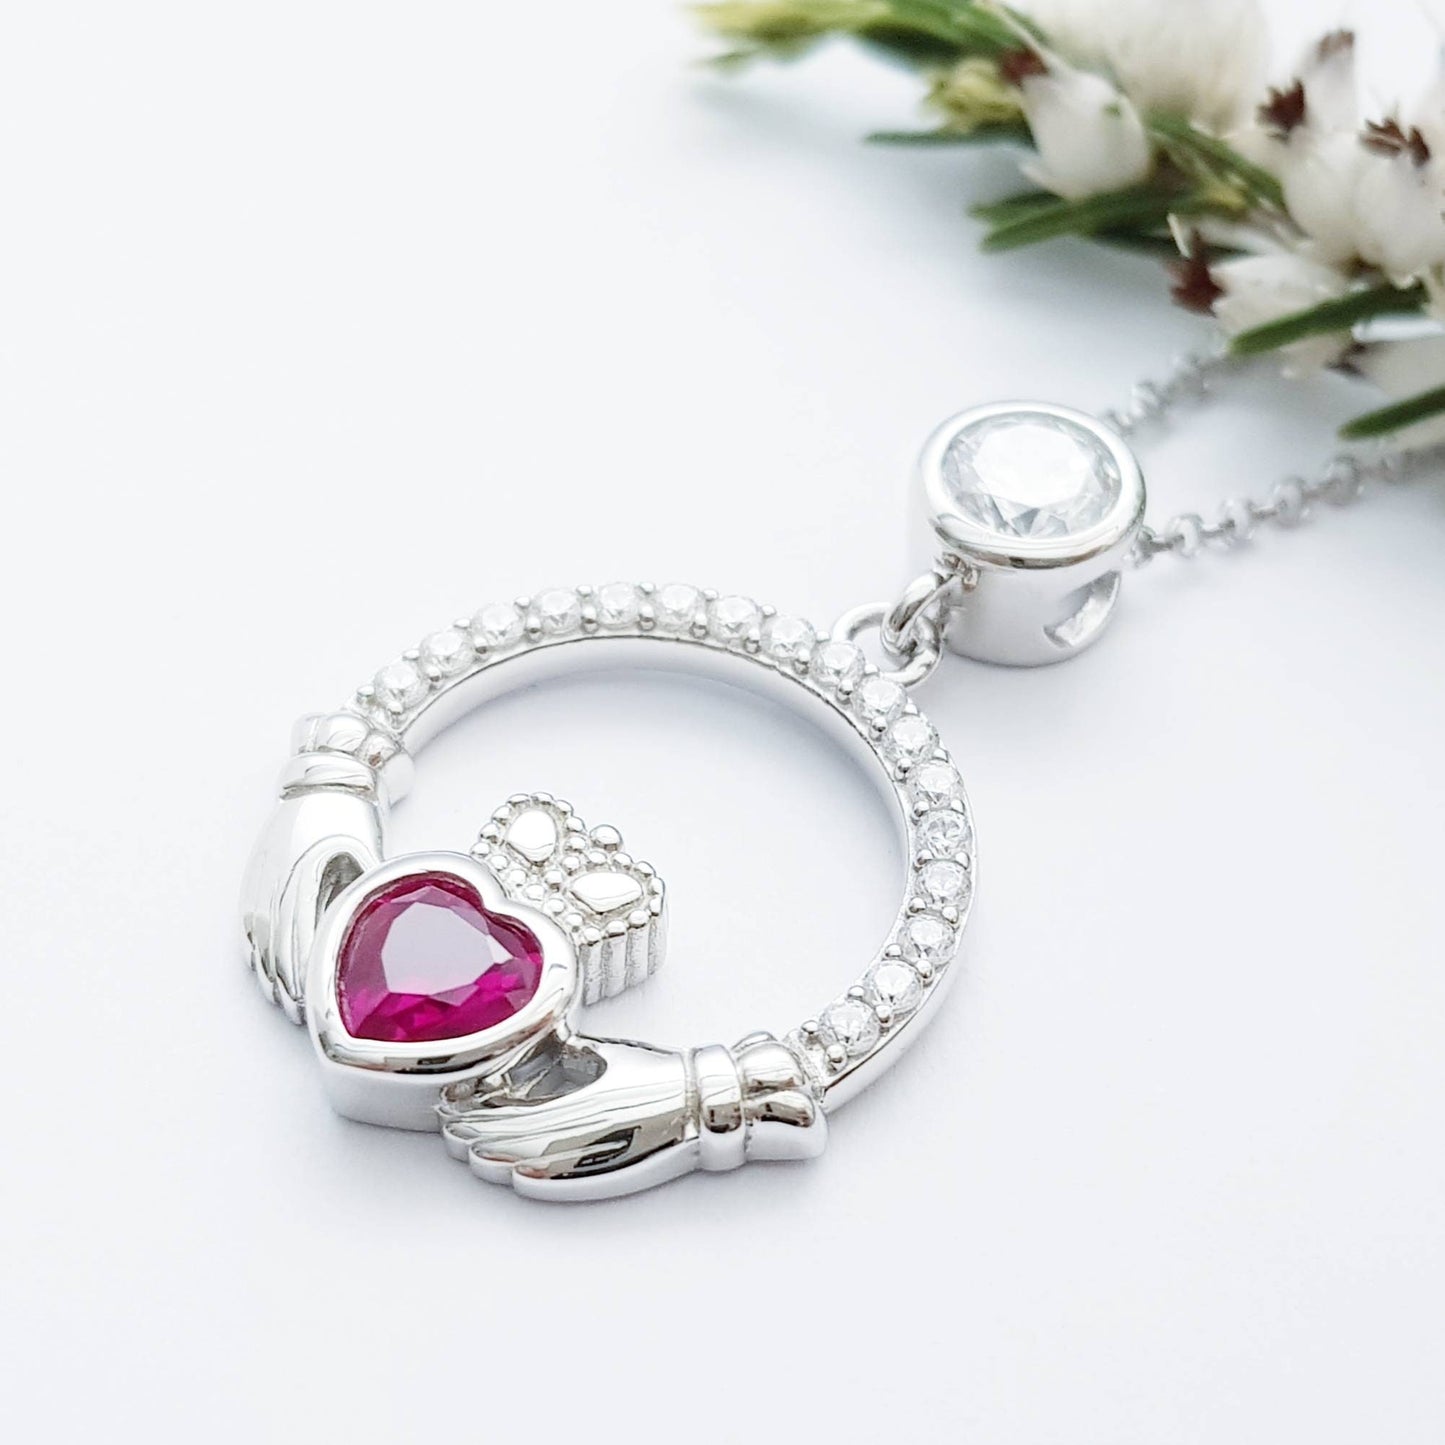 Sterling silver claddagh necklace set with ruby red July birthstone from Ireland